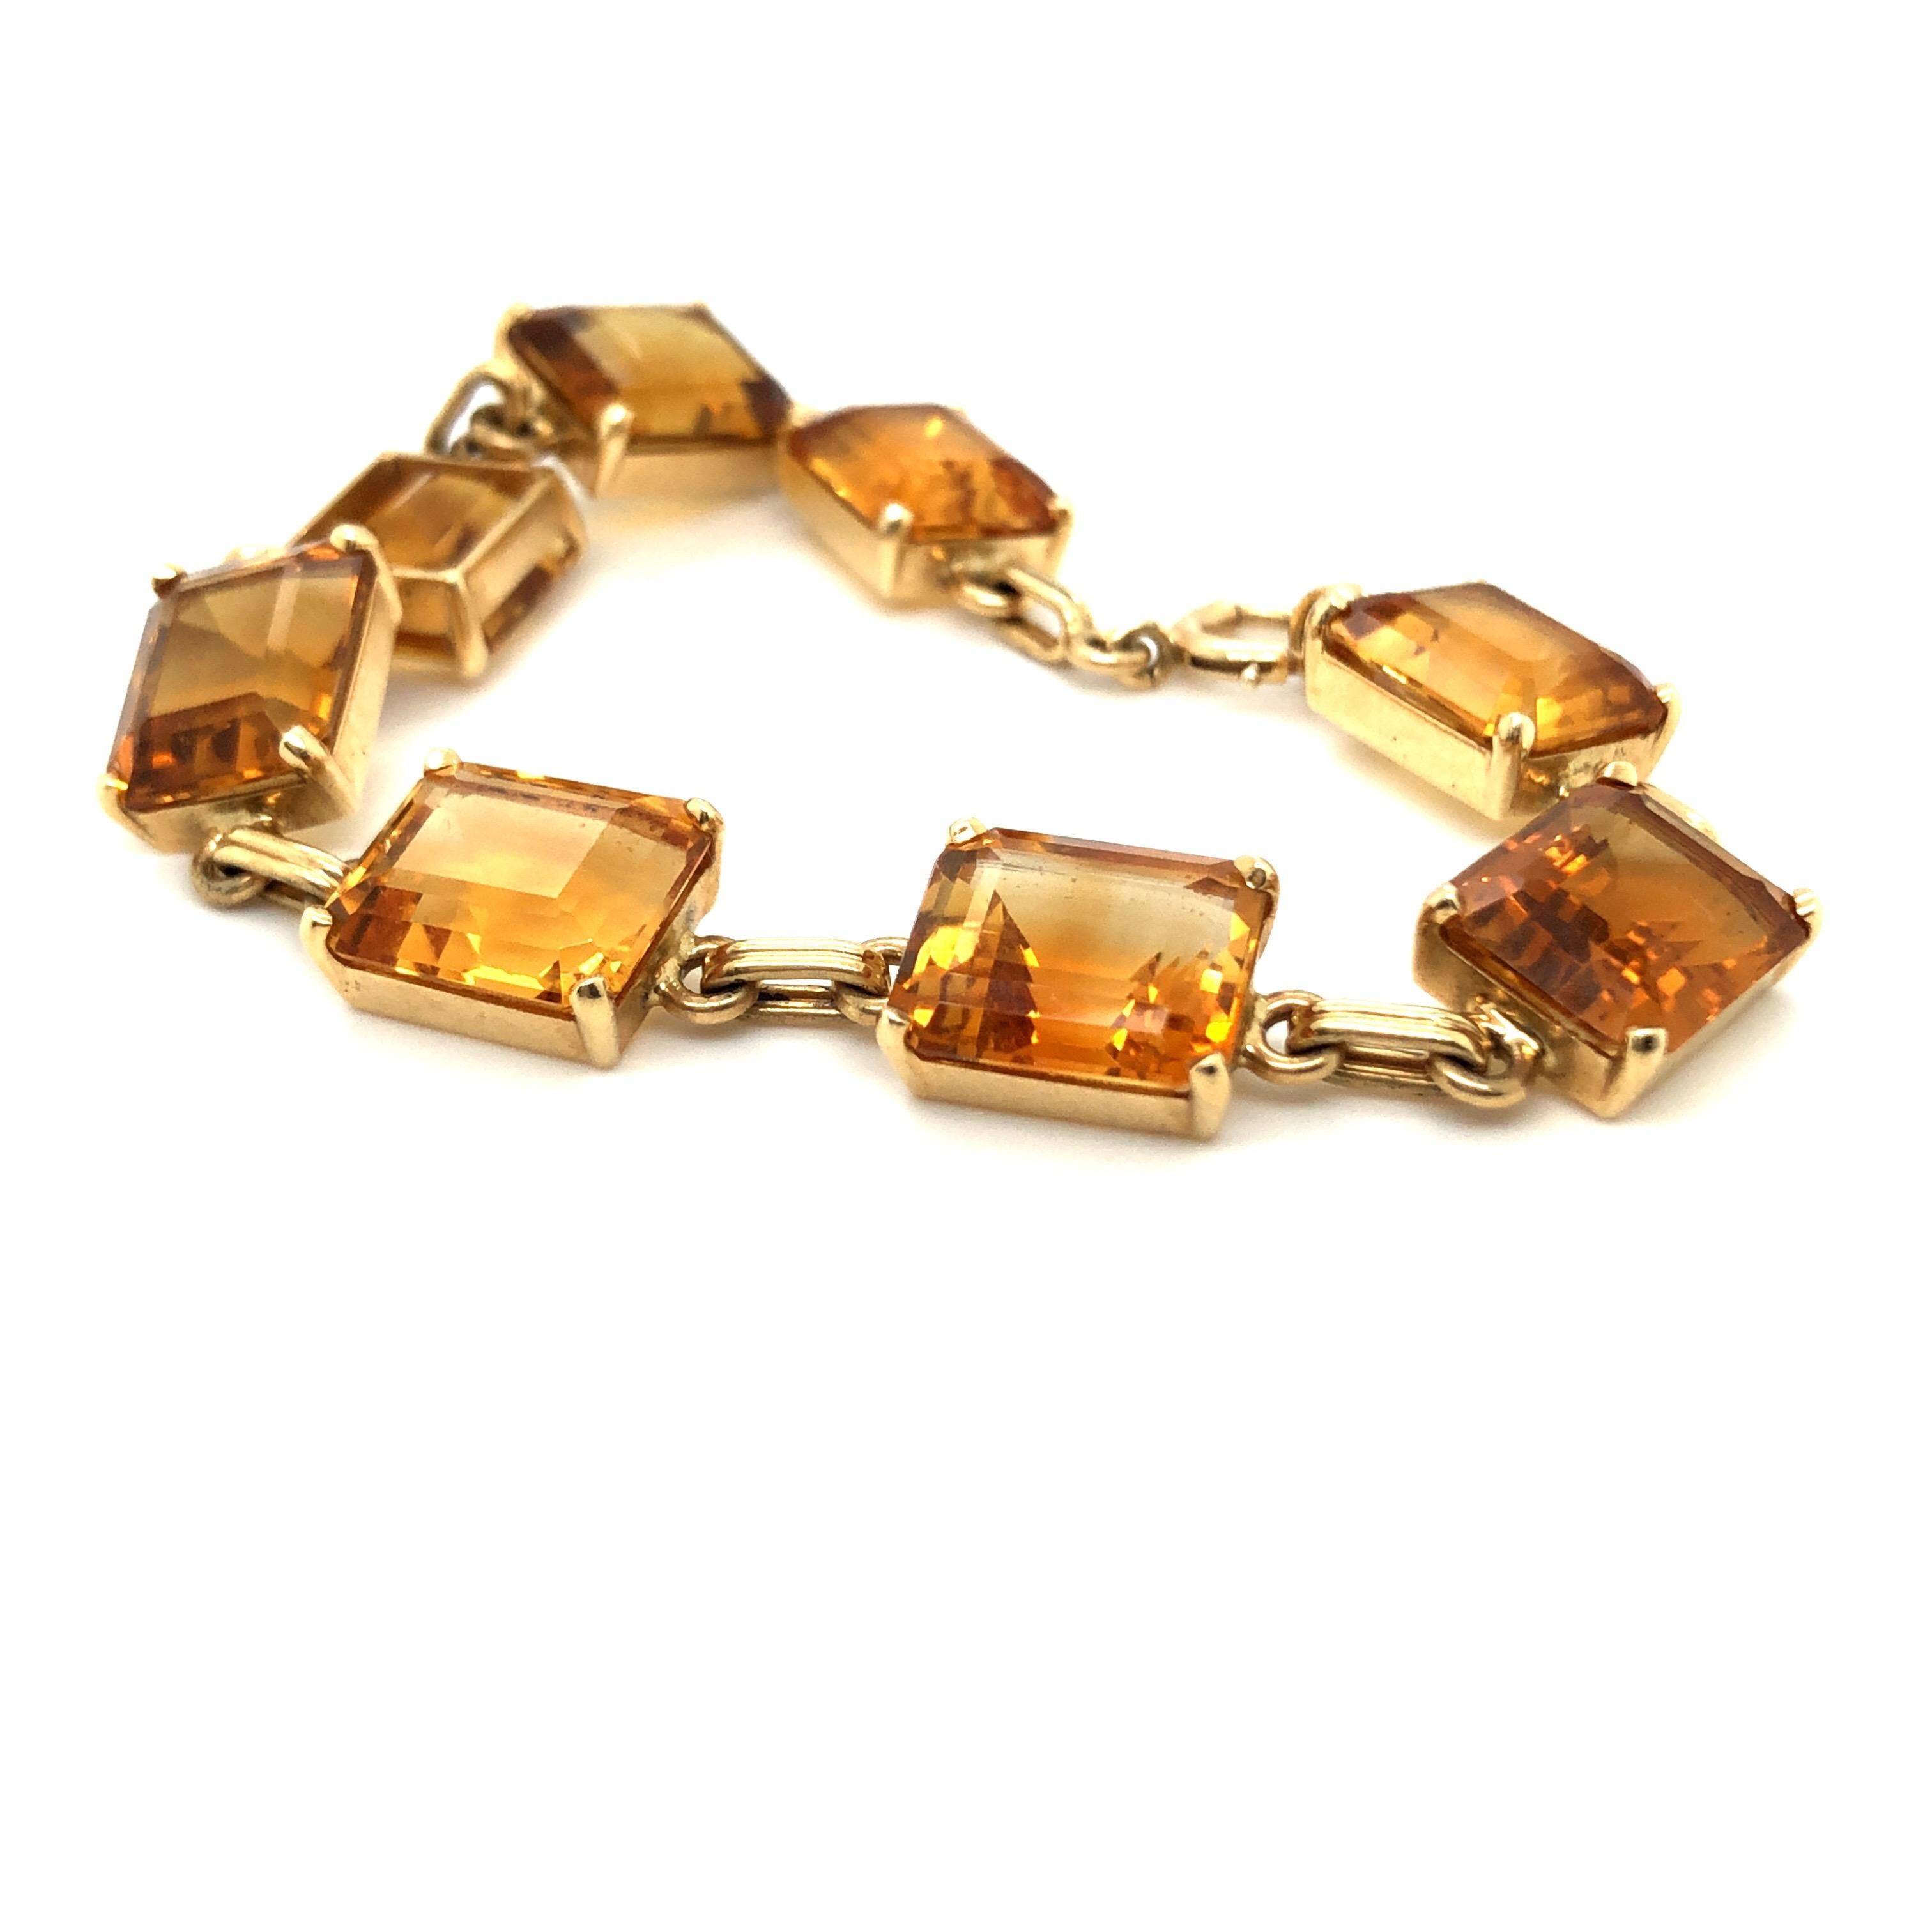 14 karat yellow gold retro citrine bracelet by Tiffany & Co, circa 1950.
Stylish citrine bracelet by Tiffany & Co., composed of 8 rectangular-cut citrines (totalling about 45 carats) interspersed by a cable-link chain in 14 karat yellow gold. This